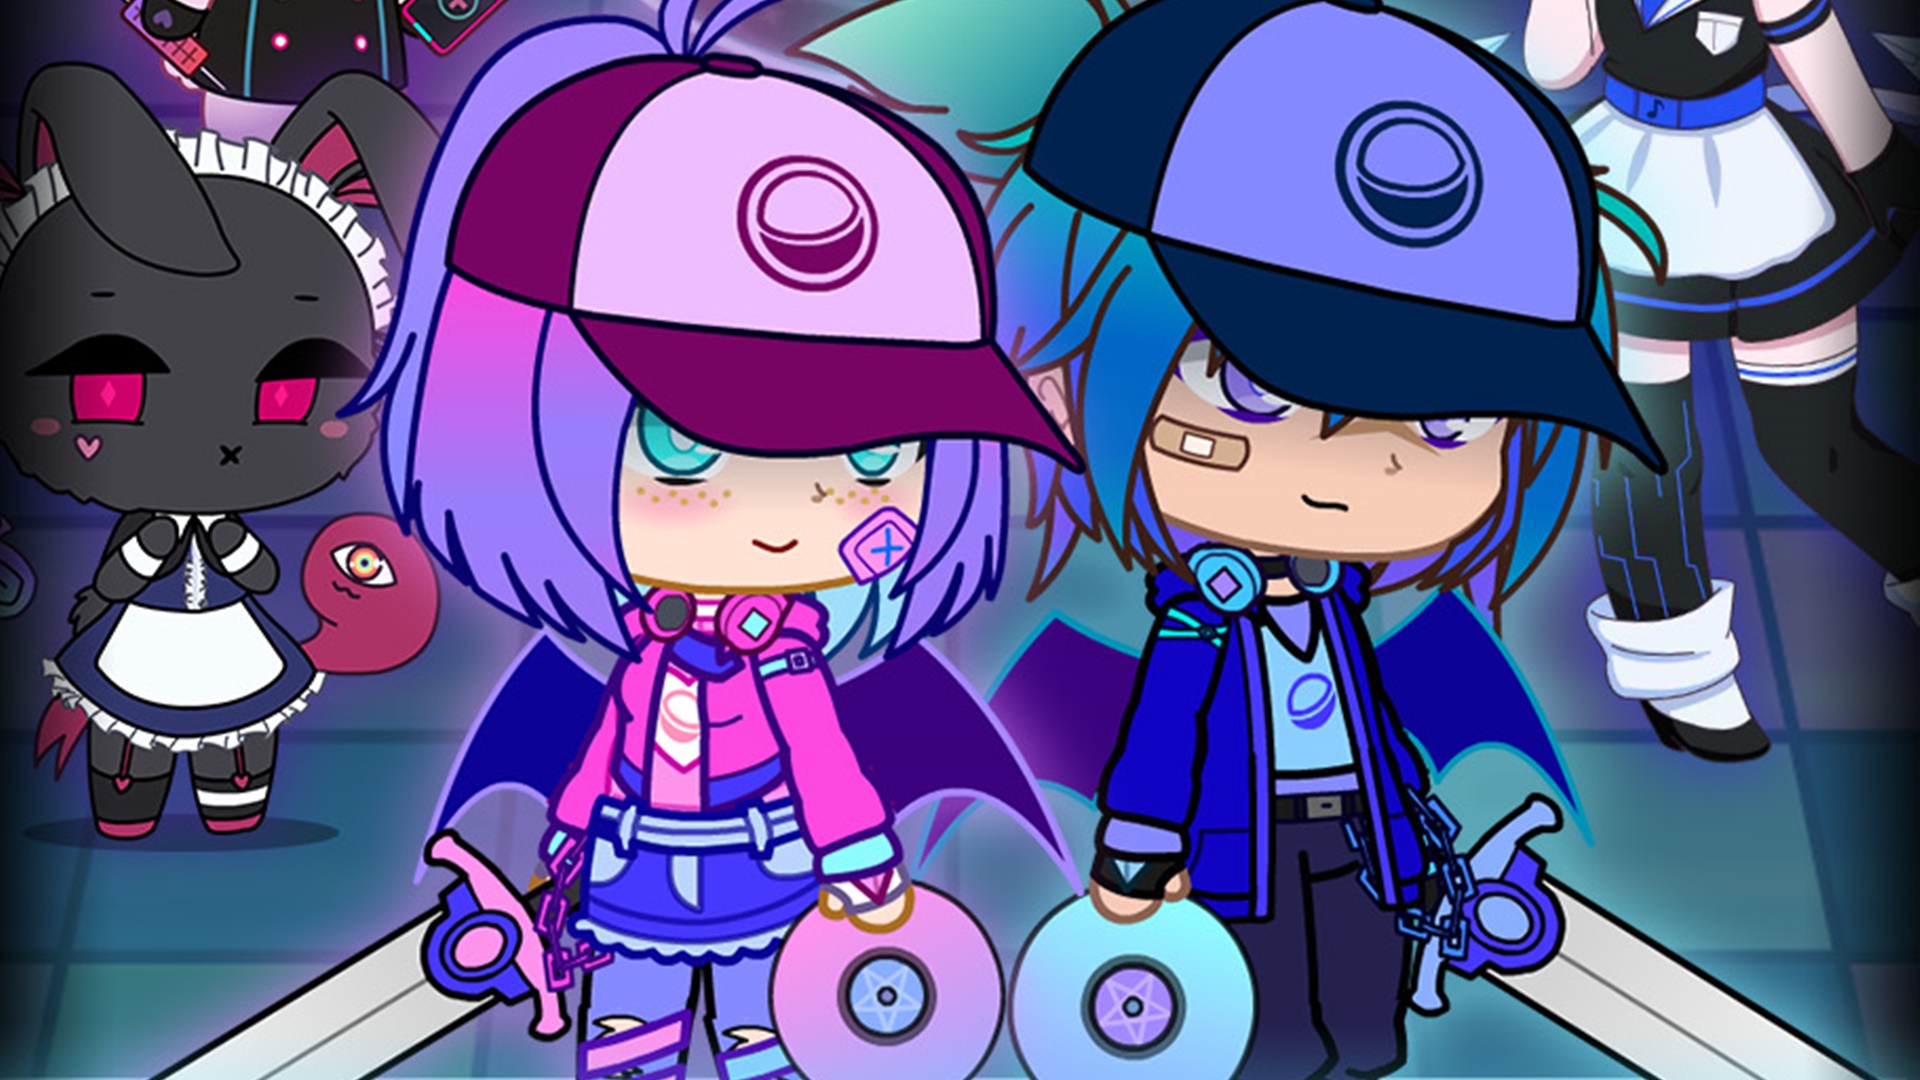 Gacha Life 2 Release Date Trailer And Gameplay Pocket Tactics Cool wallpapers are waiting for you here, dear gamers! gacha life 2 release date trailer and